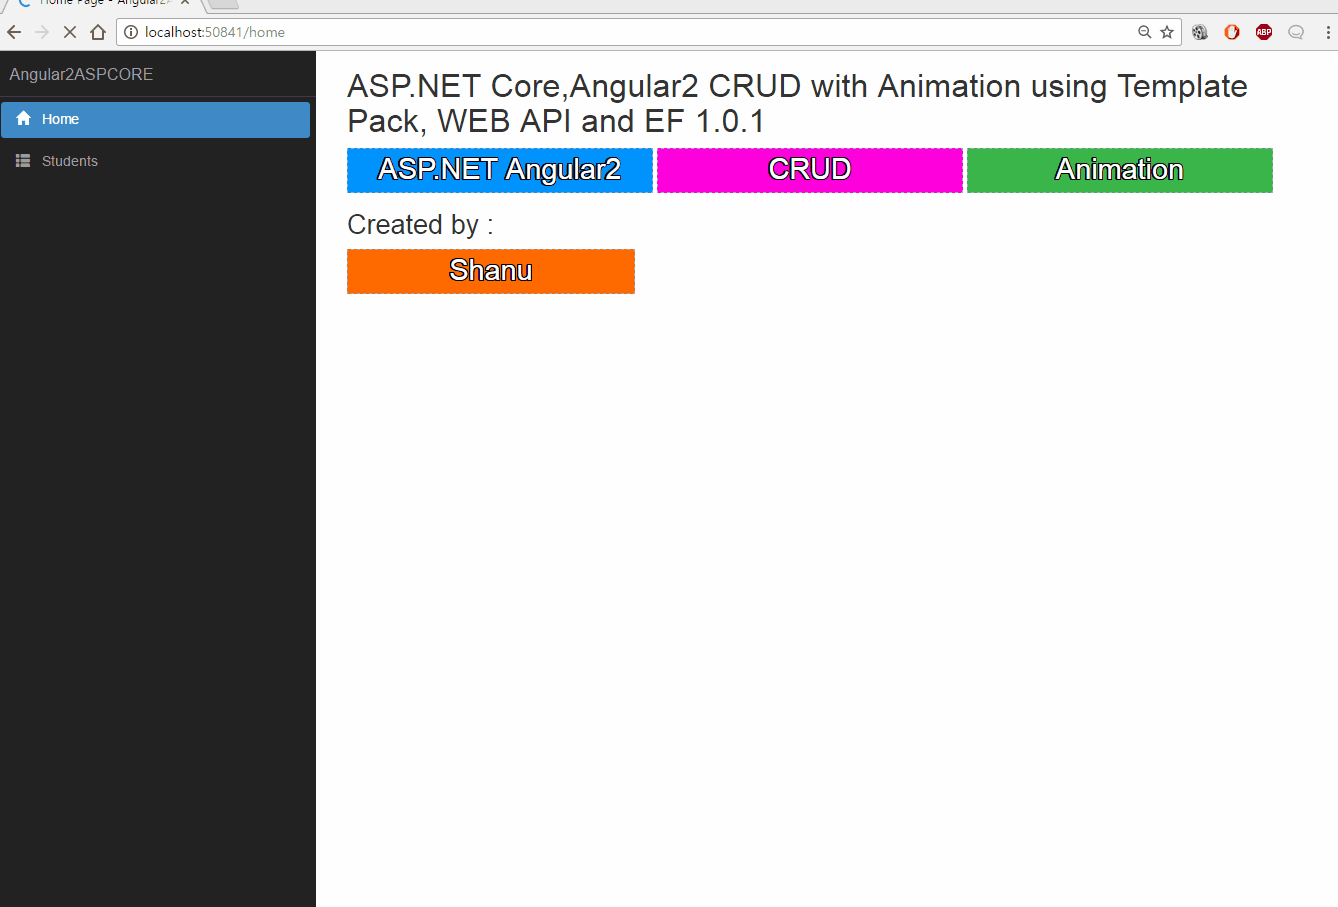  Core,Angular2 CRUD with Animation using Template Pack, WEB API and  EF  - CodeProject